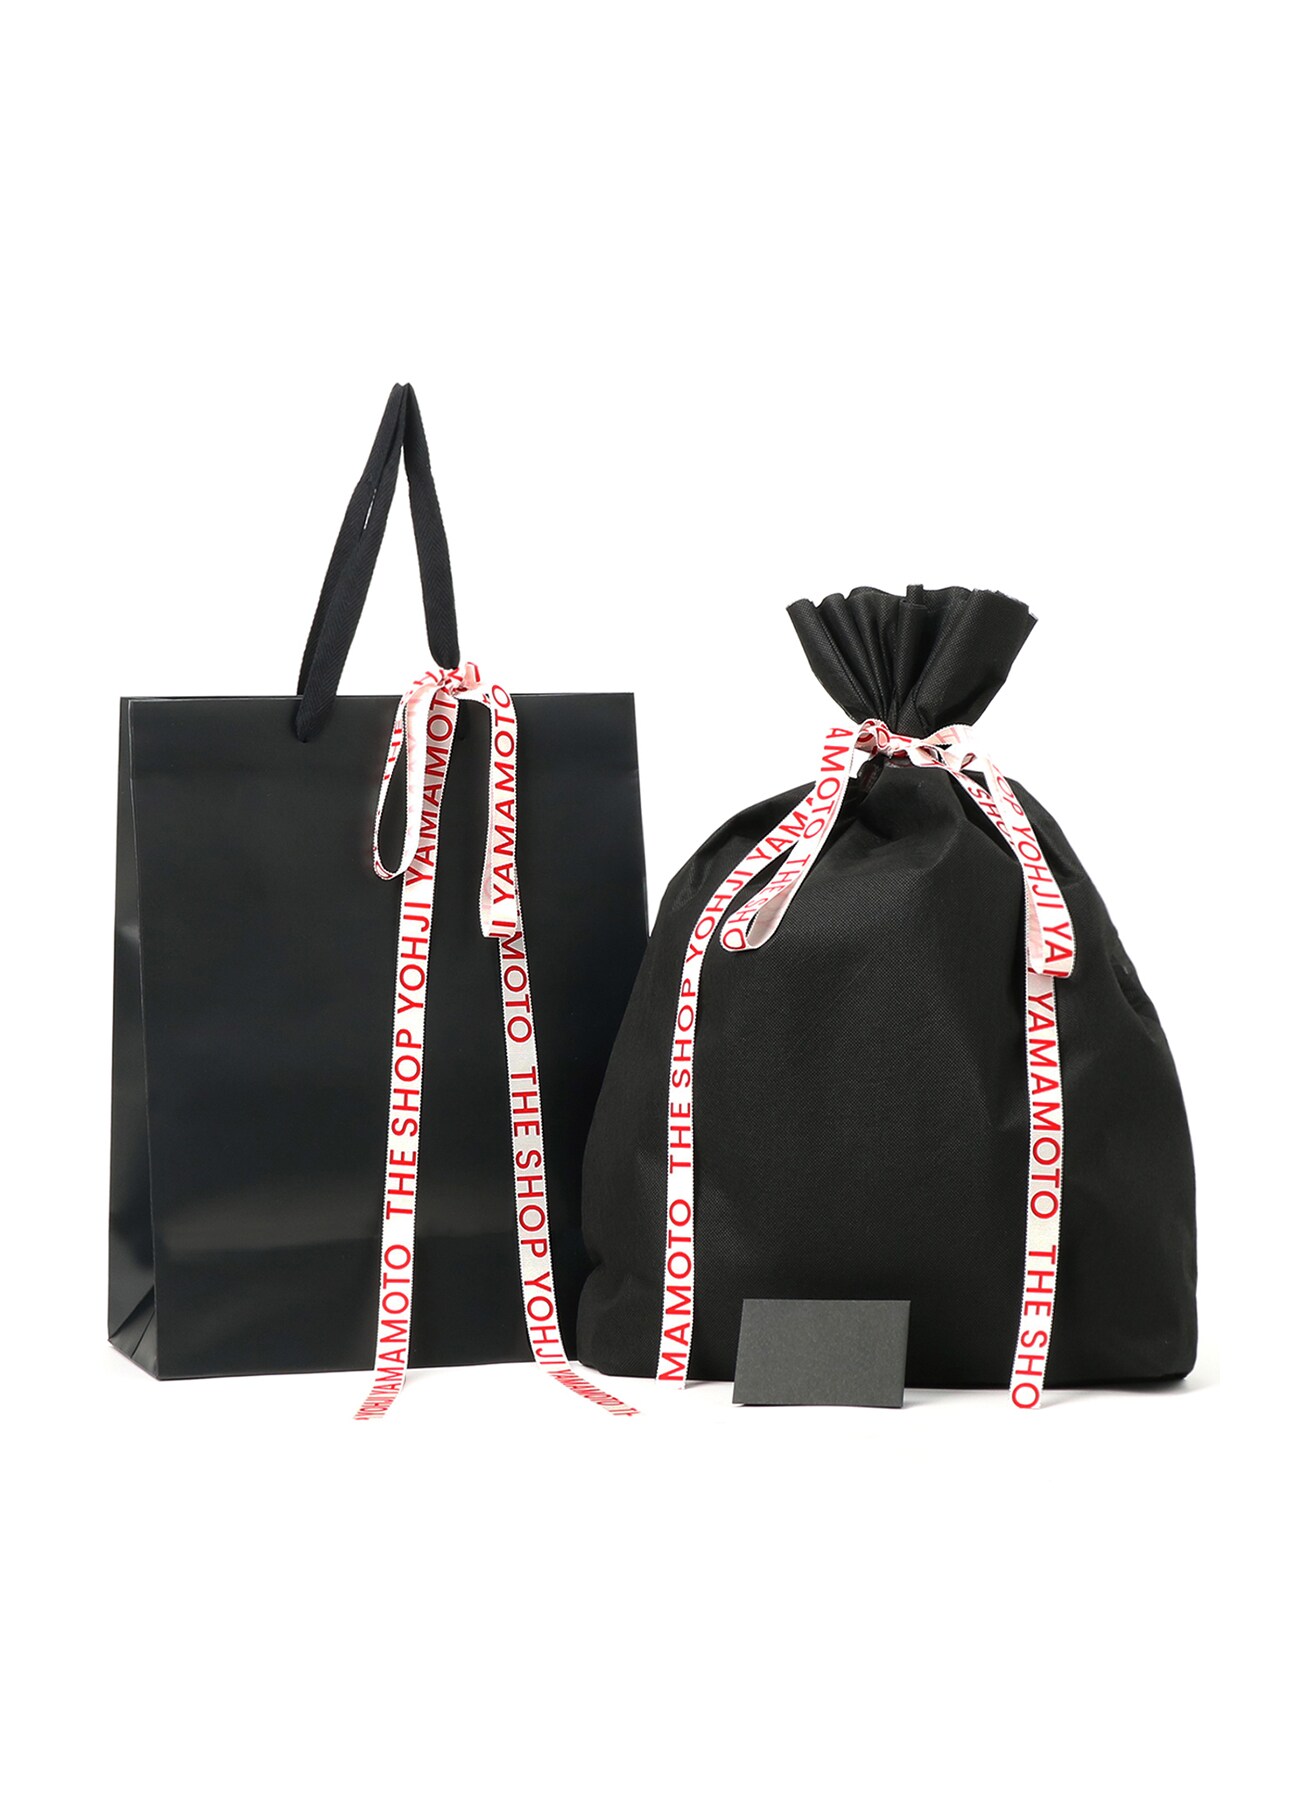 Self-wrap THE SHOP GIFT KIT (M) (WhitexRed)